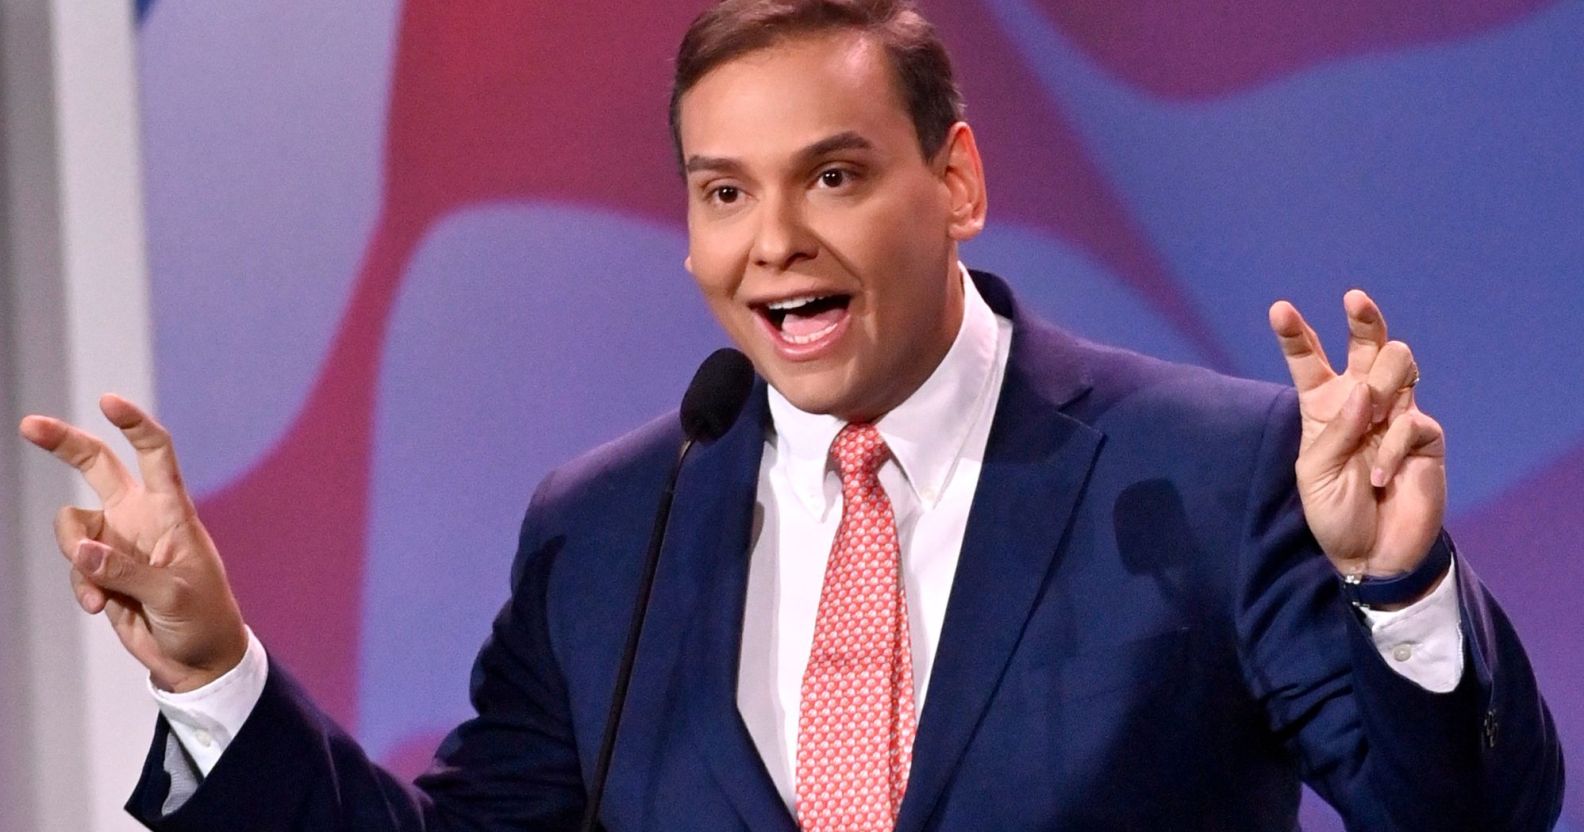 Photo of US congressman George Santos wearing a navy suit, white shirt and pink tie as he makes air quotation gestures with both of his hands.